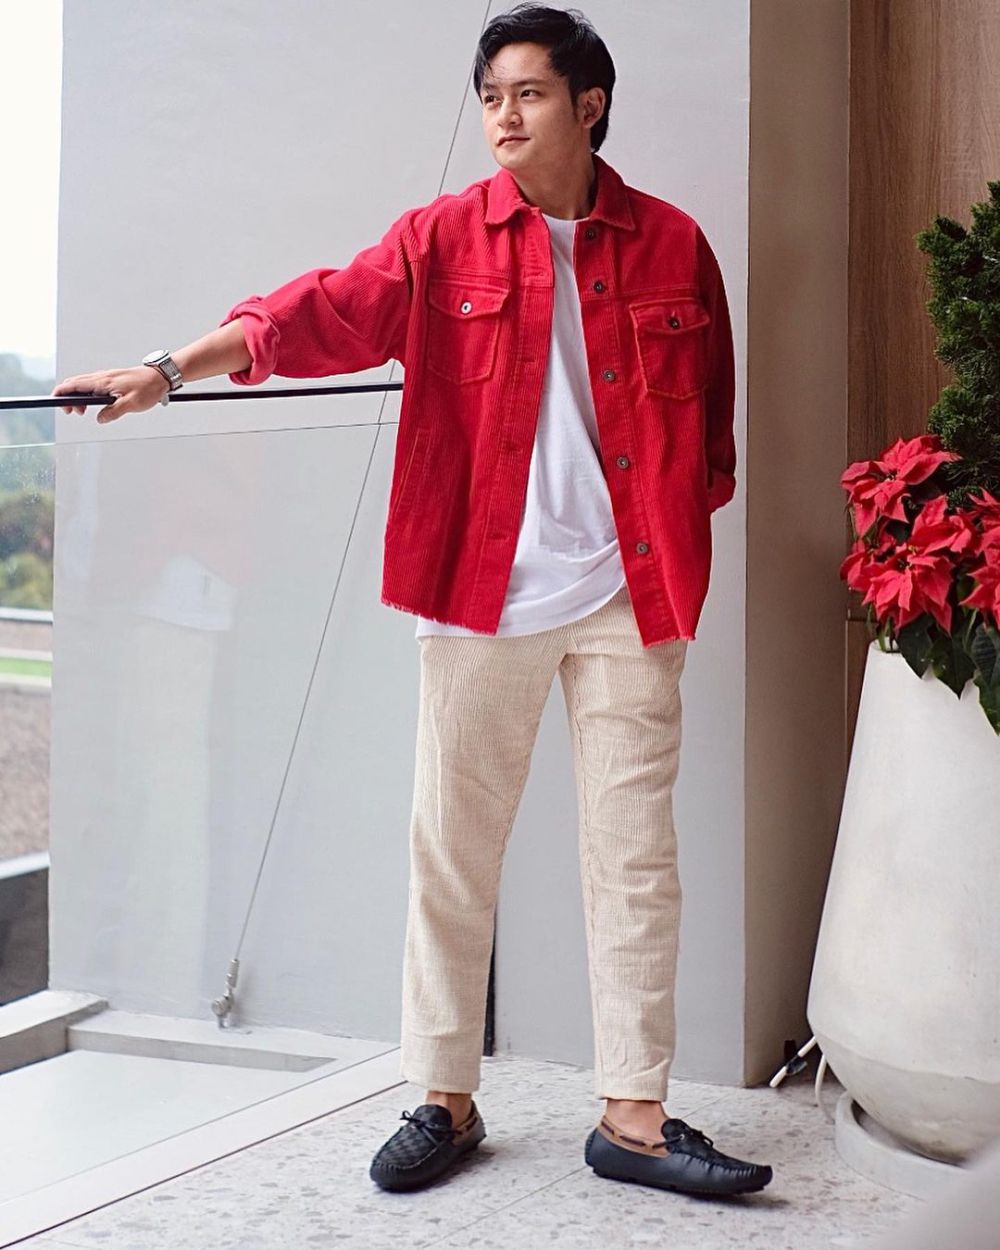 8 Ide Mix and Match Outer ala Randy Martin, Fashionable dan Comfy!